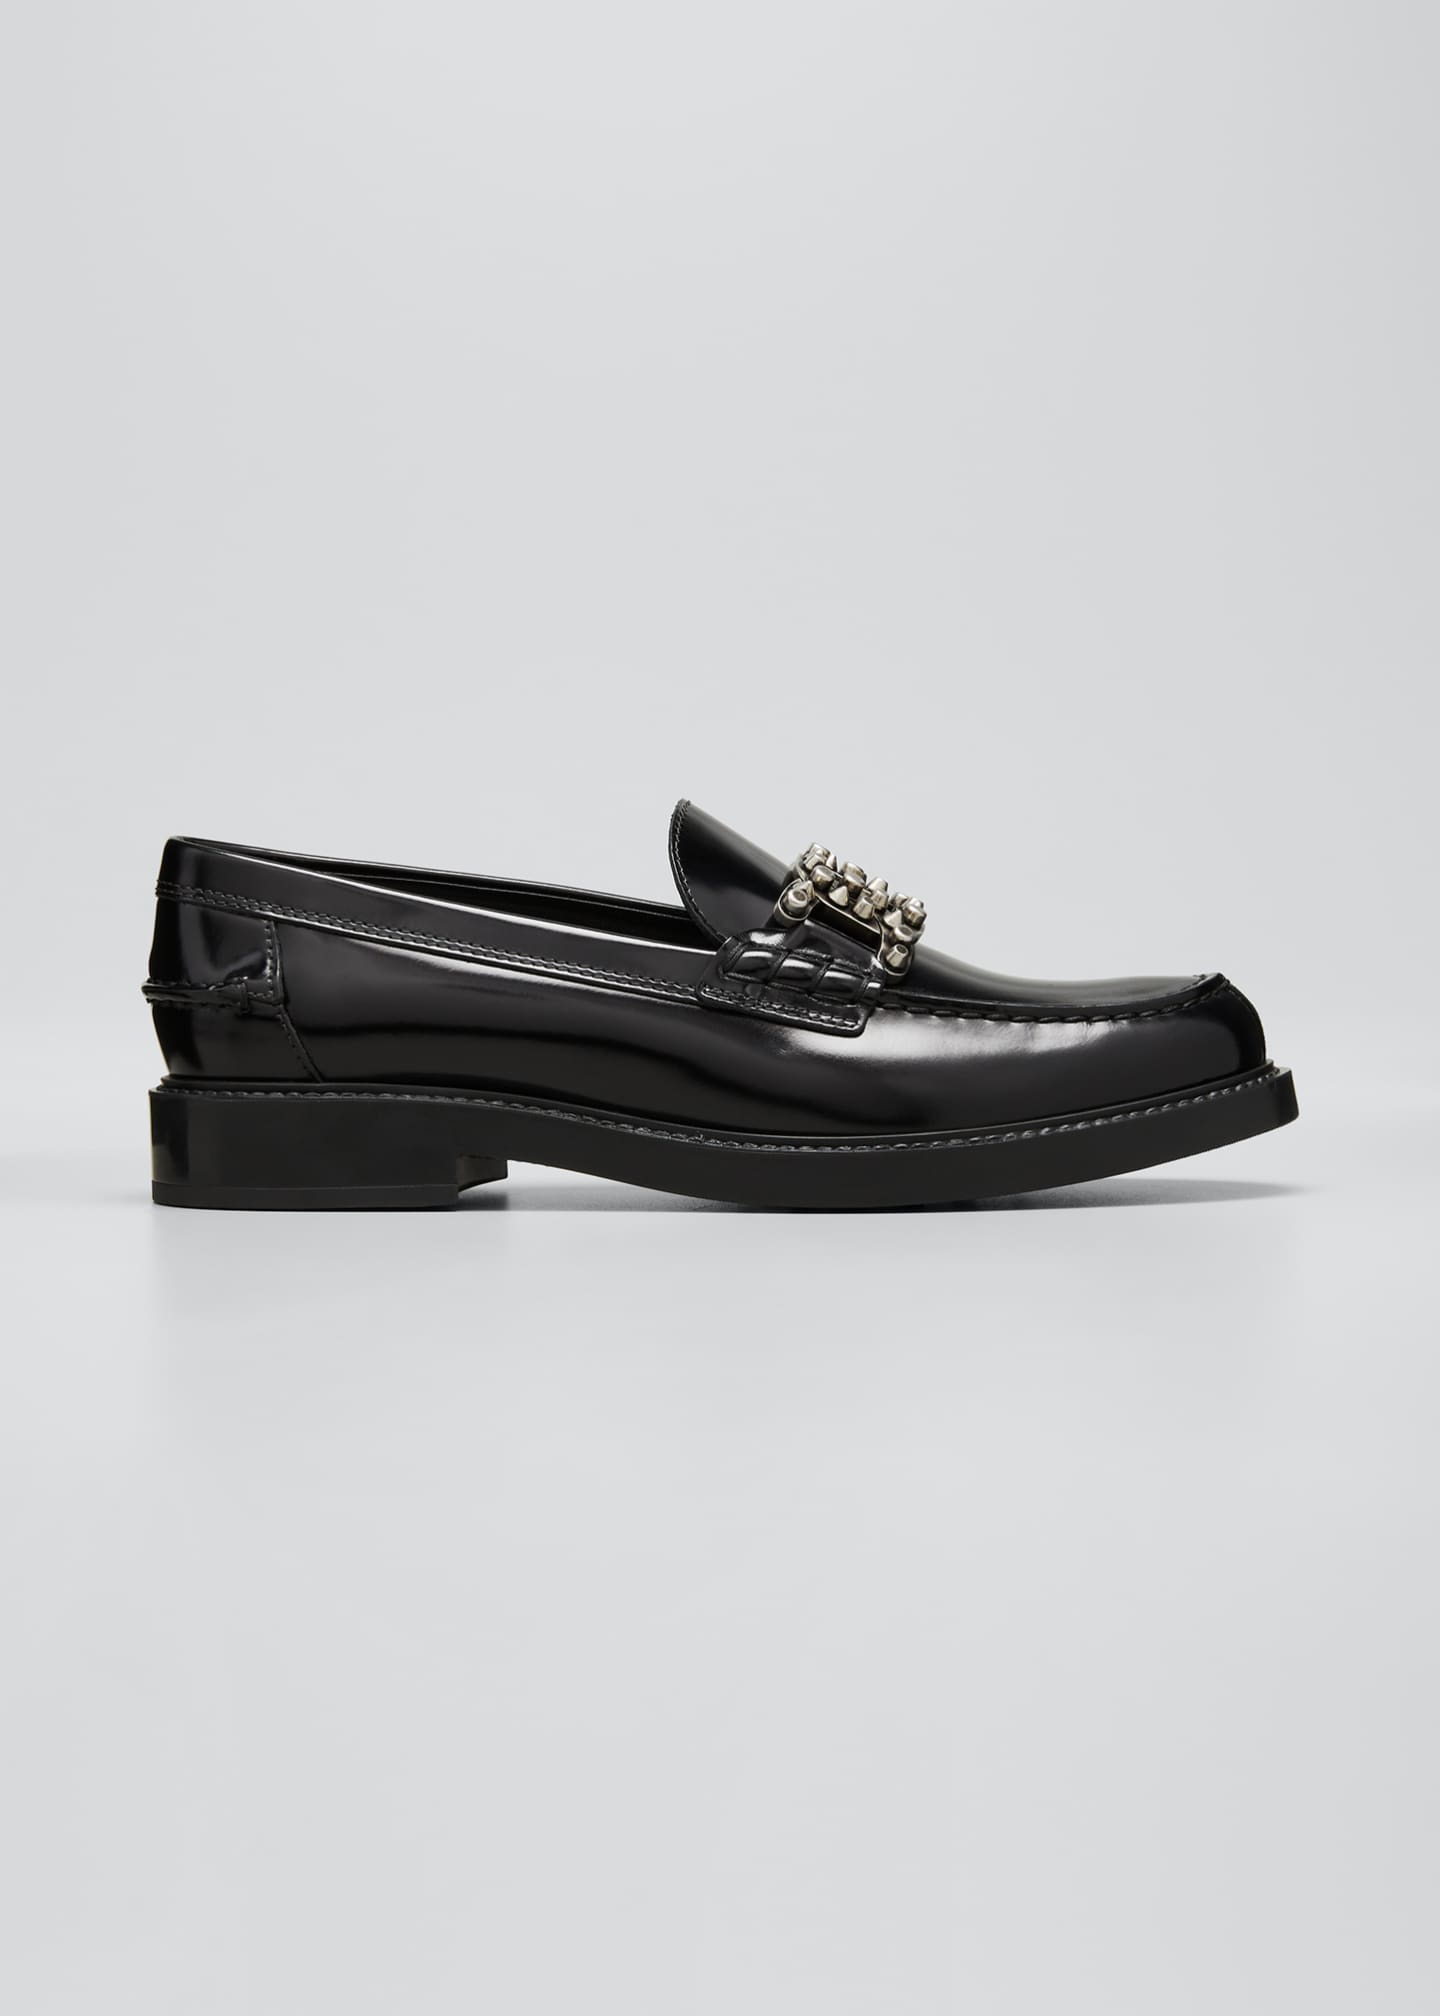 Tod's Kate Mocassino Leather Stud Loafers - Bergdorf Goodman